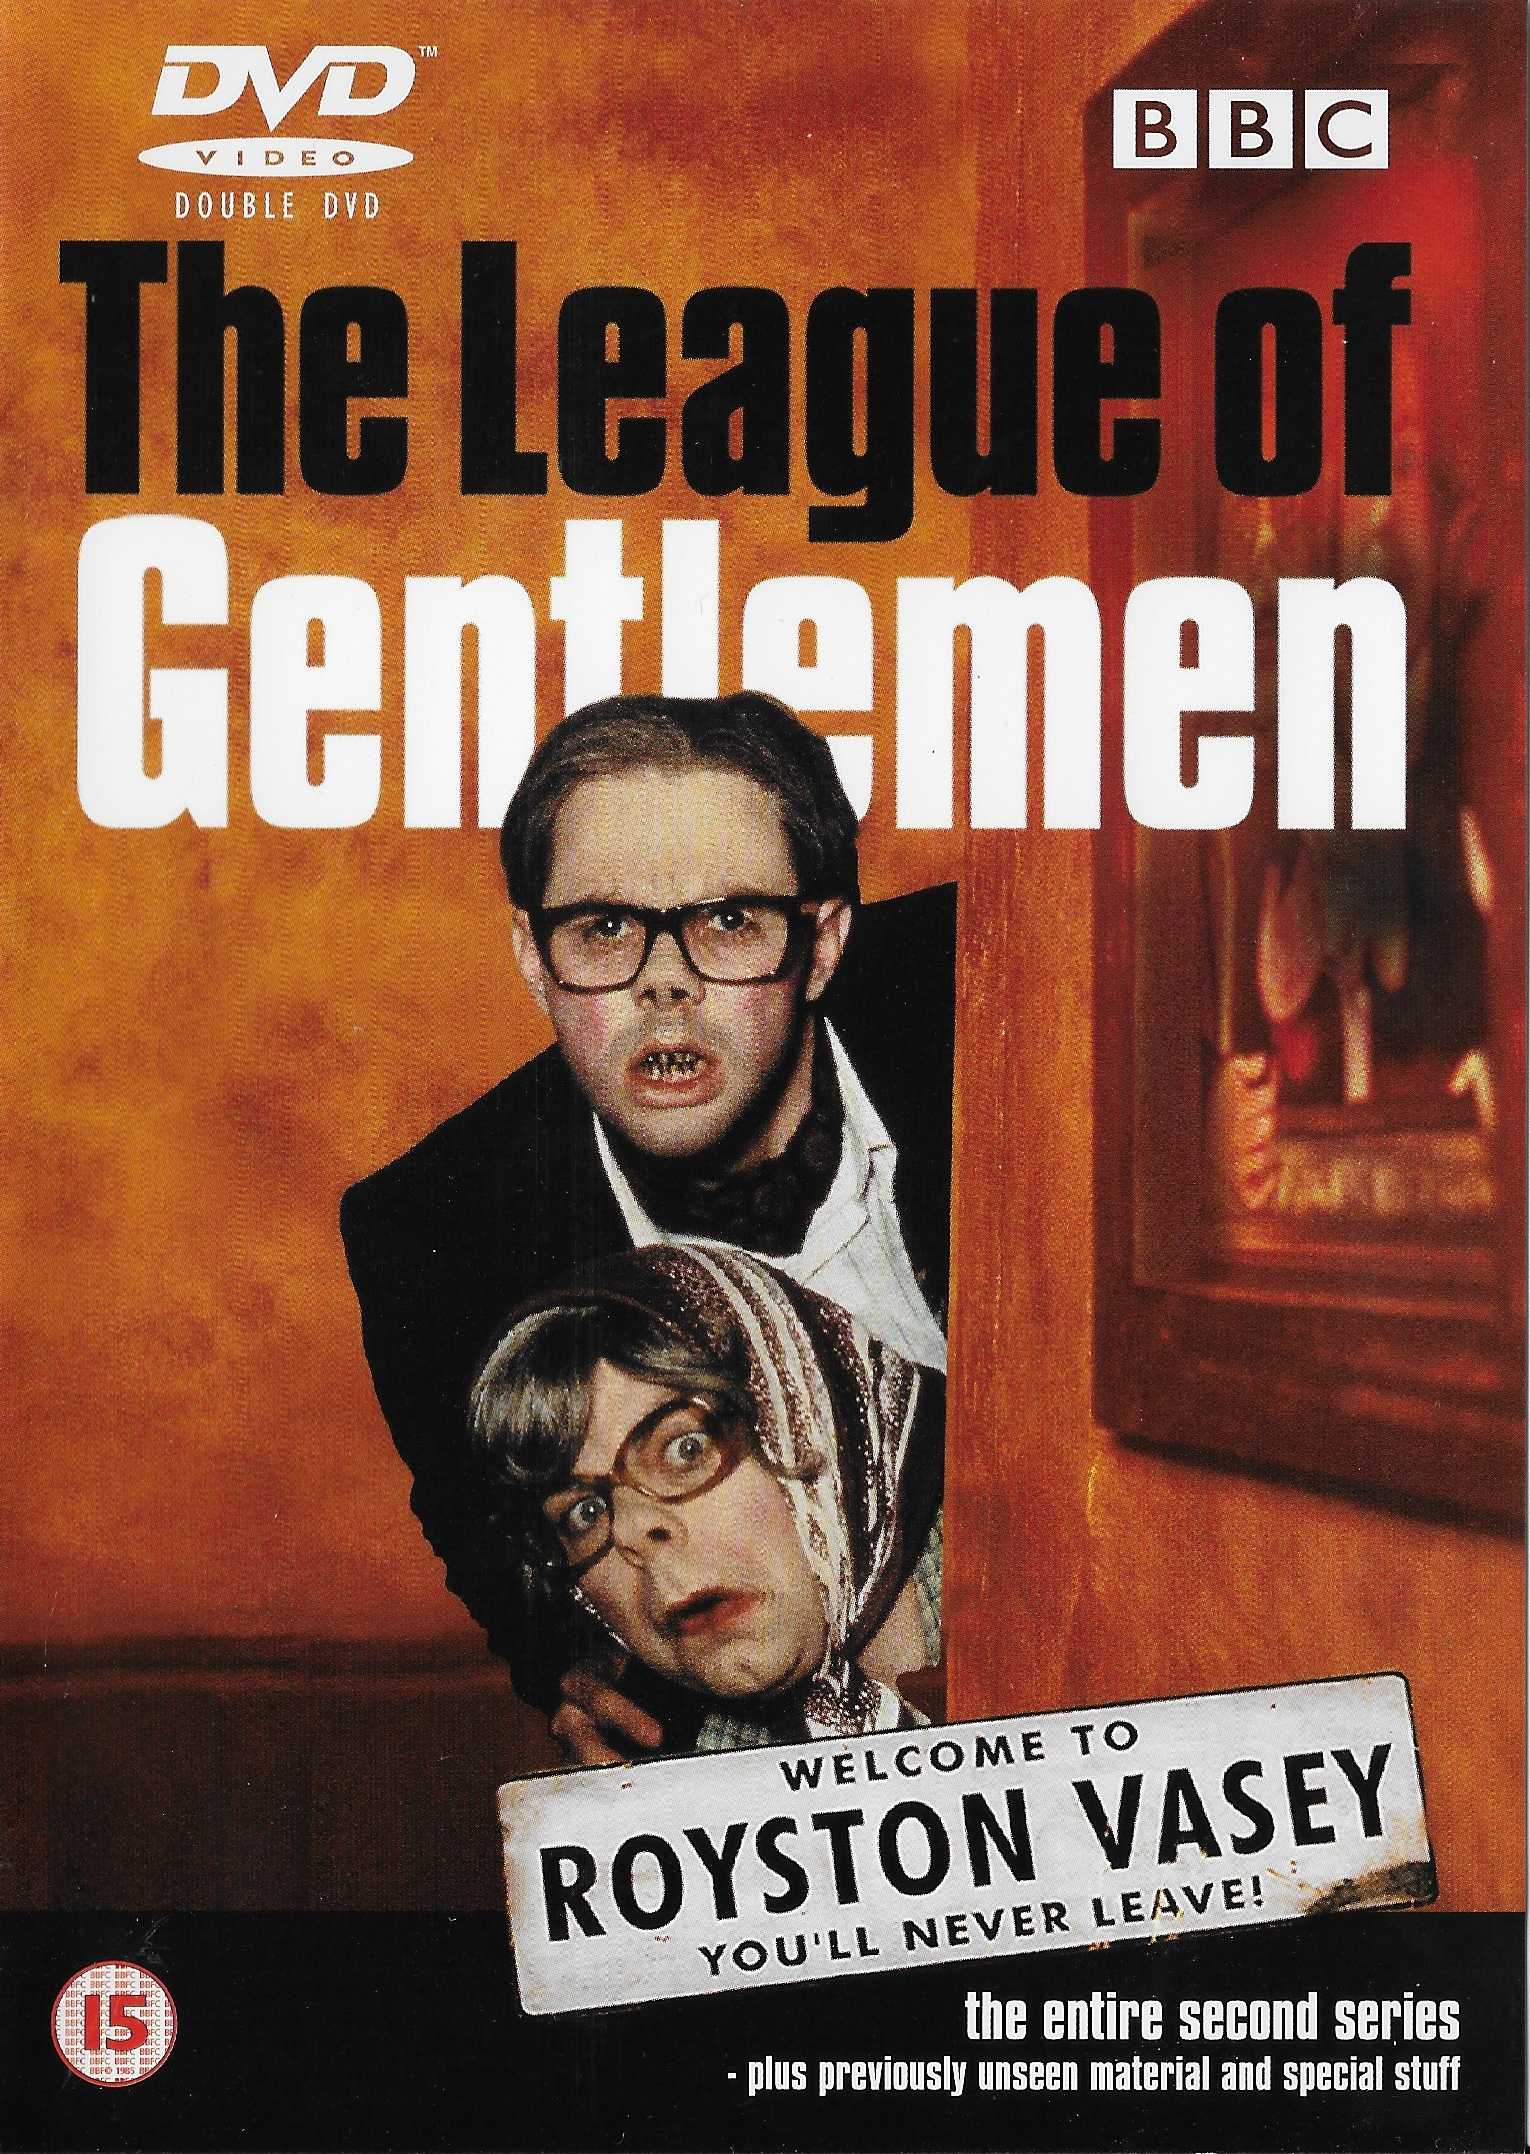 Picture of BBCDVD 1049 The league of gentlemen - Series 2 by artist Mark Gatiss / Steve Pemberton / Reece Shearsmith from the BBC dvds - Records and Tapes library